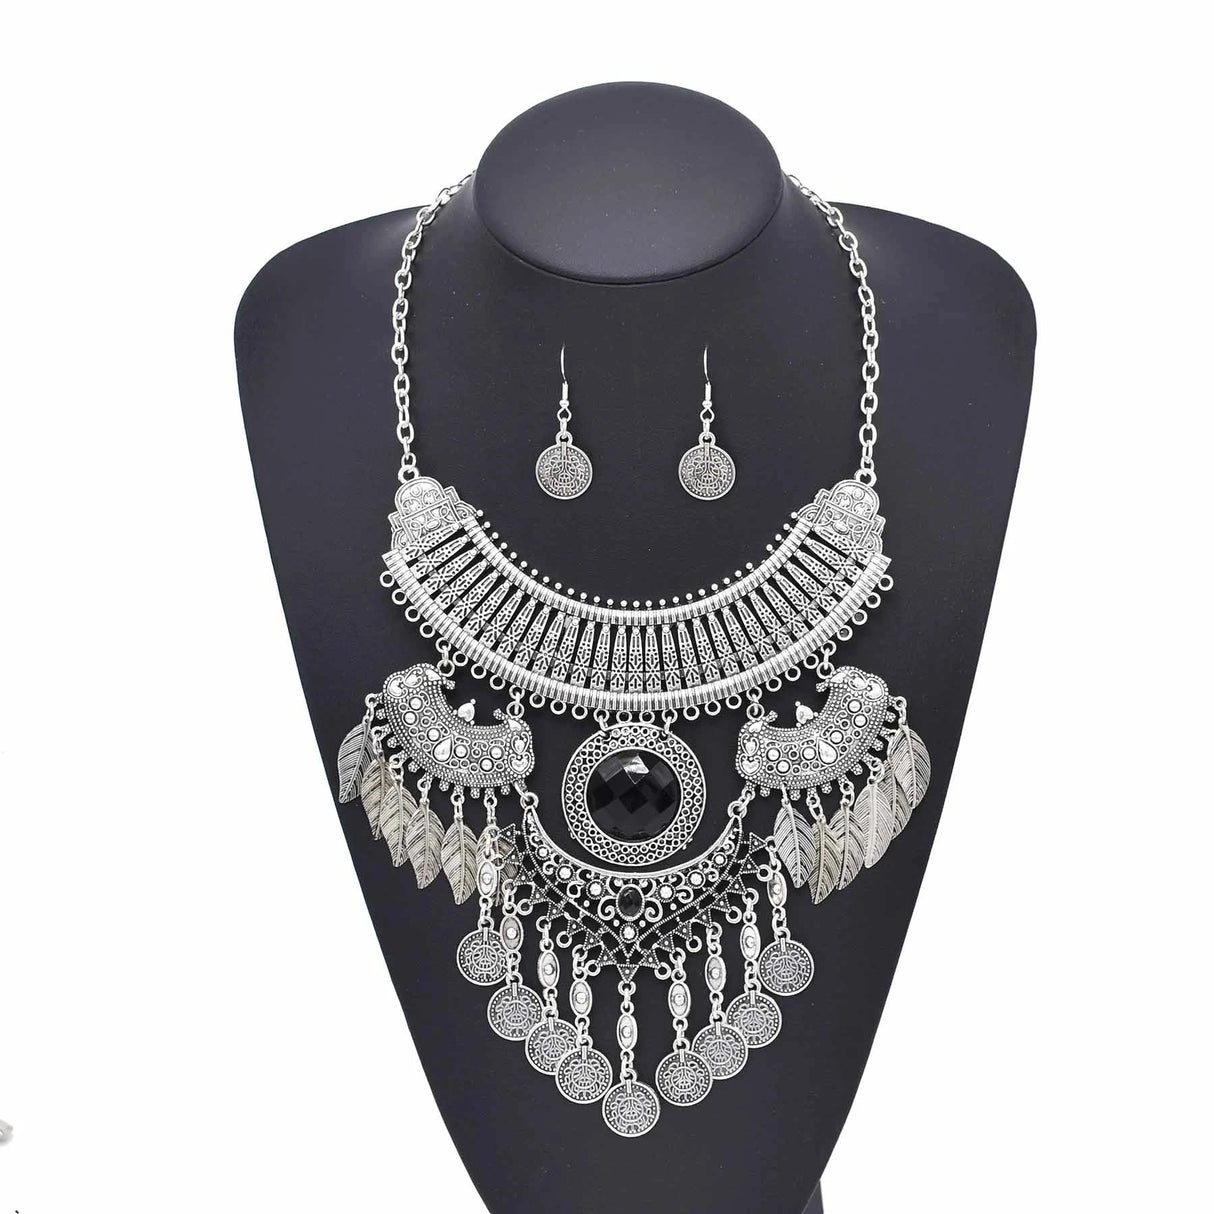 silver colored bohemian women's accessory set of two pieces, earrings and a large three-tiered chain with a large central black stone, and dangling coins and leaves.